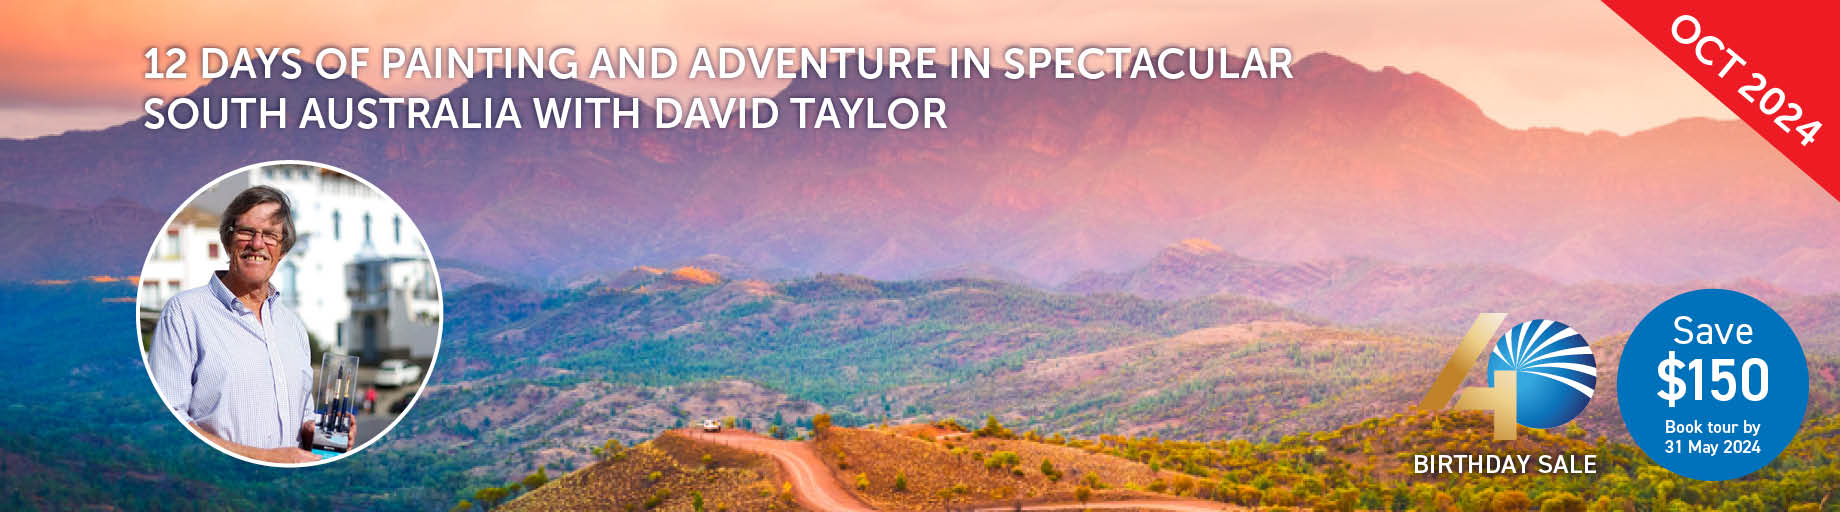 Flinders Ranges, Clare Valley and Hahndorf with David Taylor